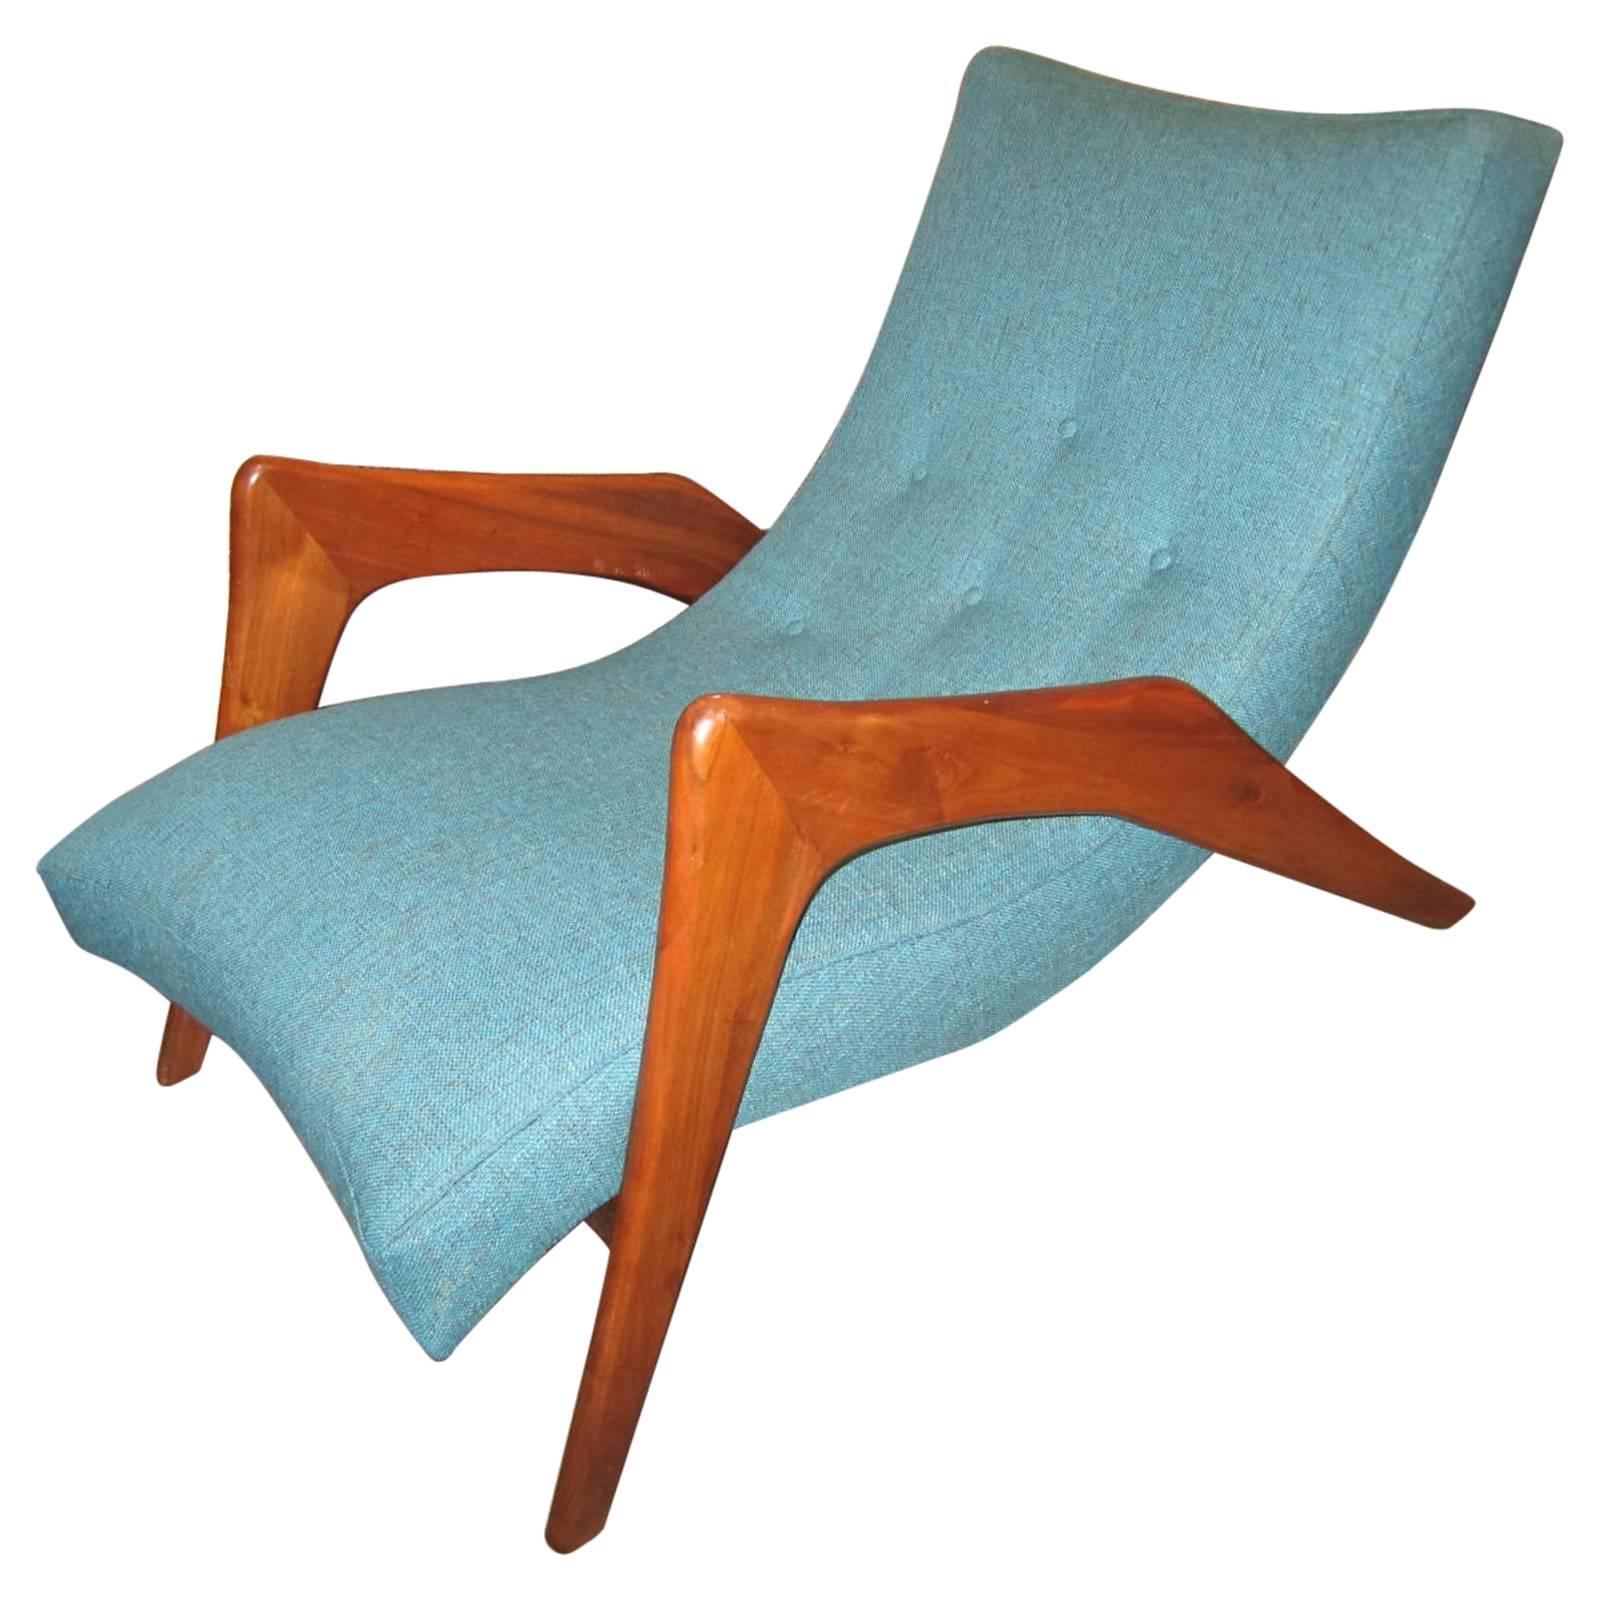 Excellent Adrian Pearsall “Grasshopper” Lounge Chair for Craft Associates